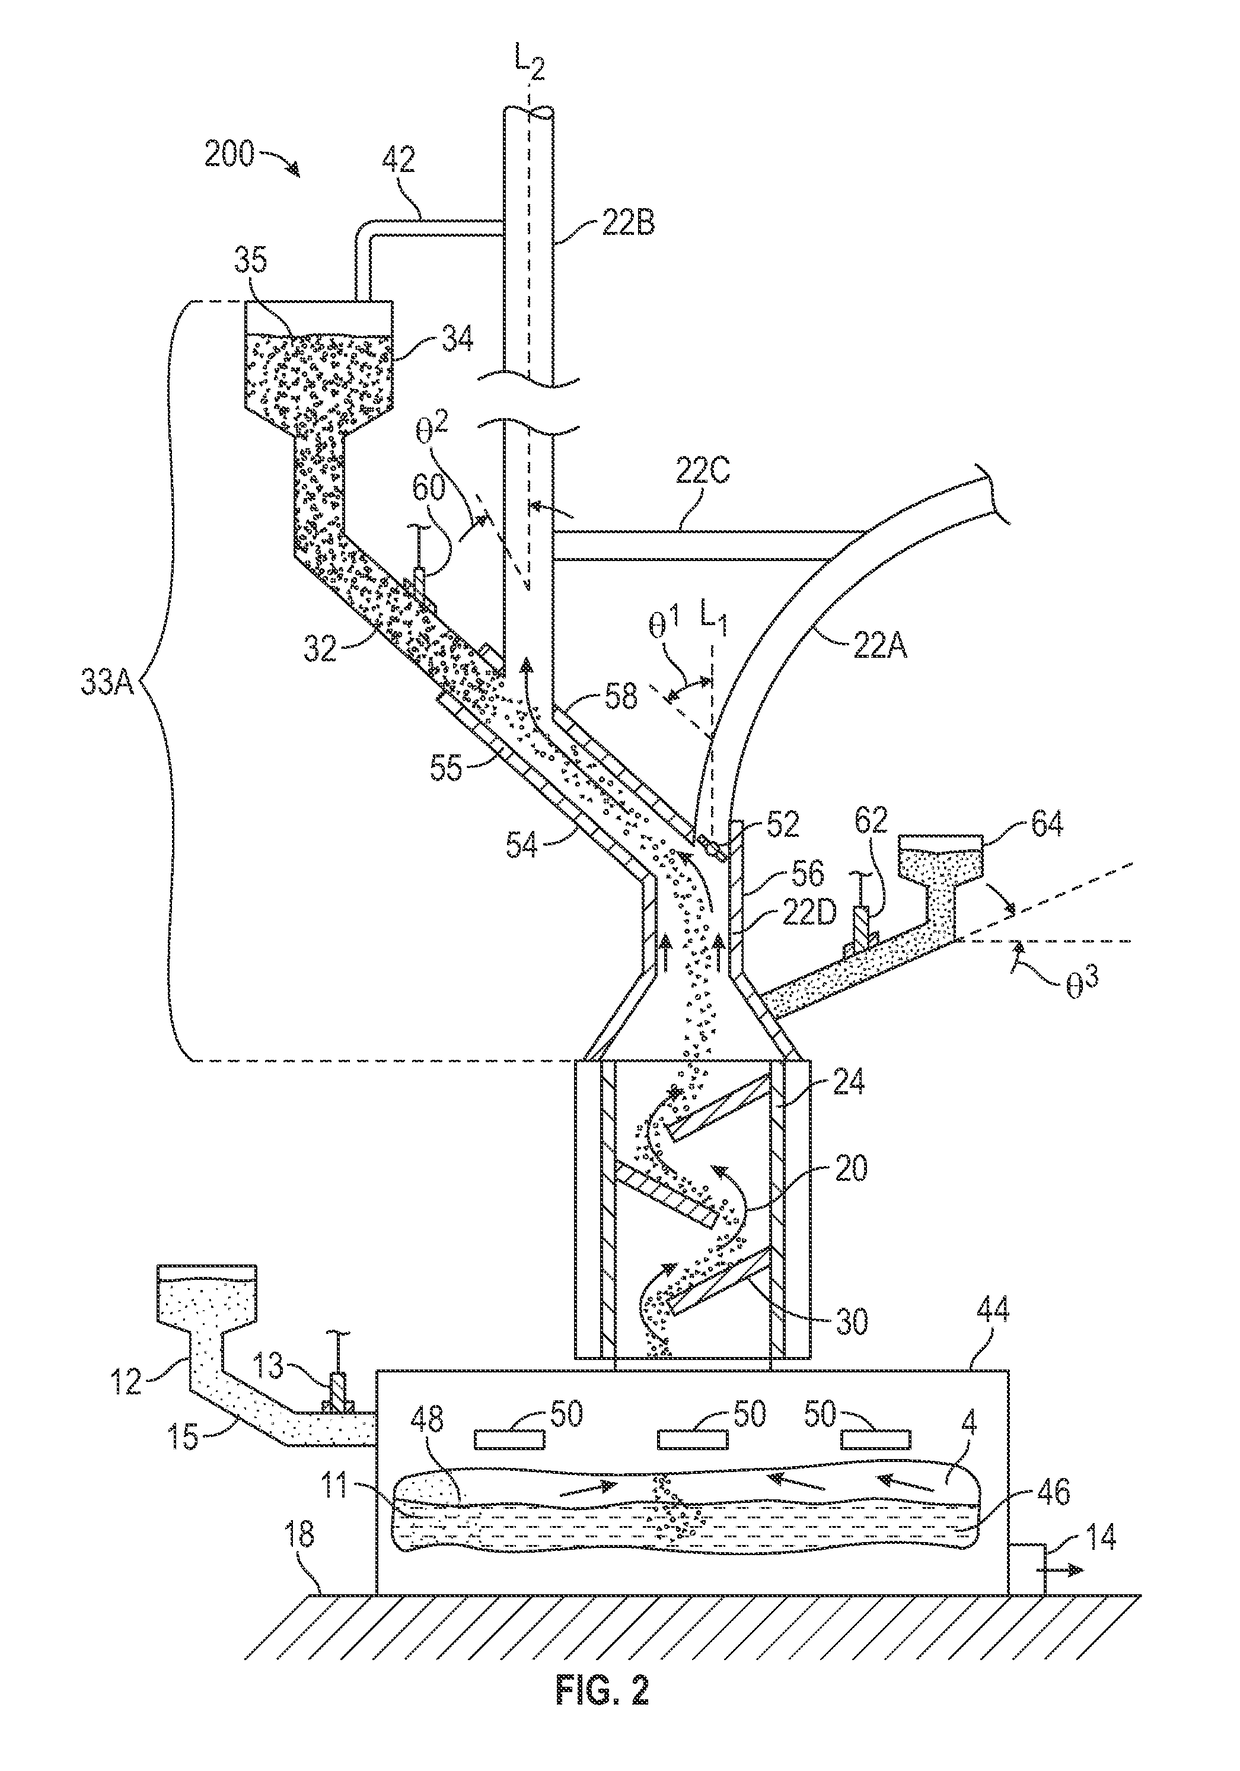 Apparatus, systems, and methods for pre-heating feedstock to a melter using melter exhaust